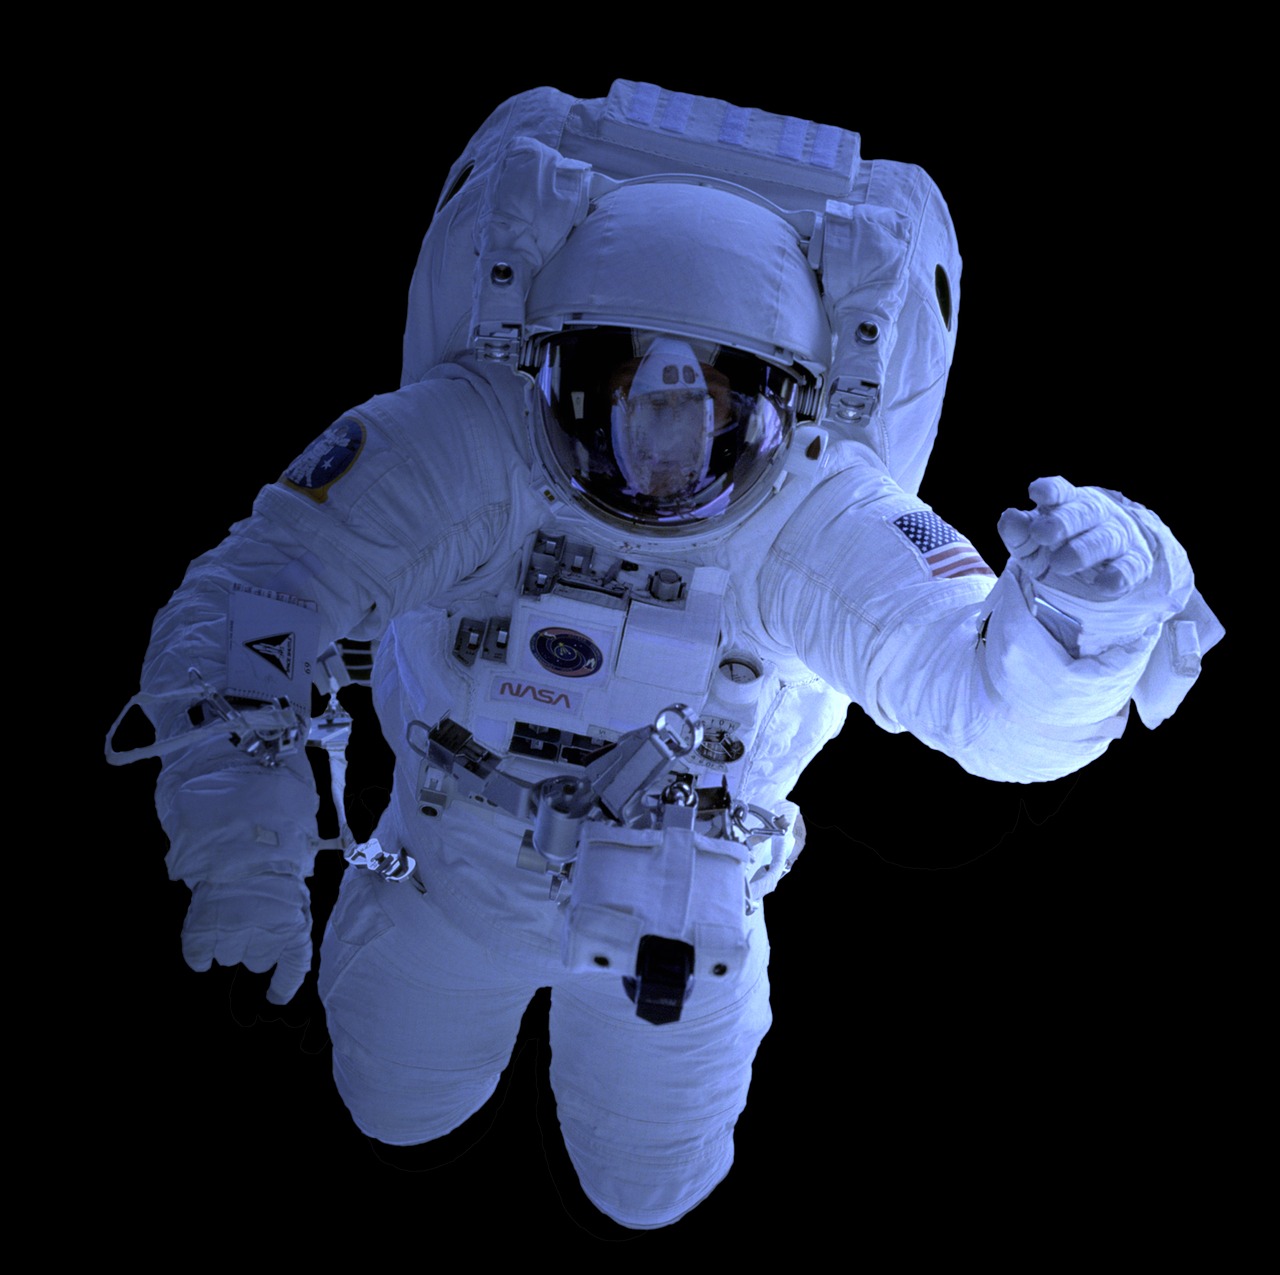 space suit astronaut isolated free photo